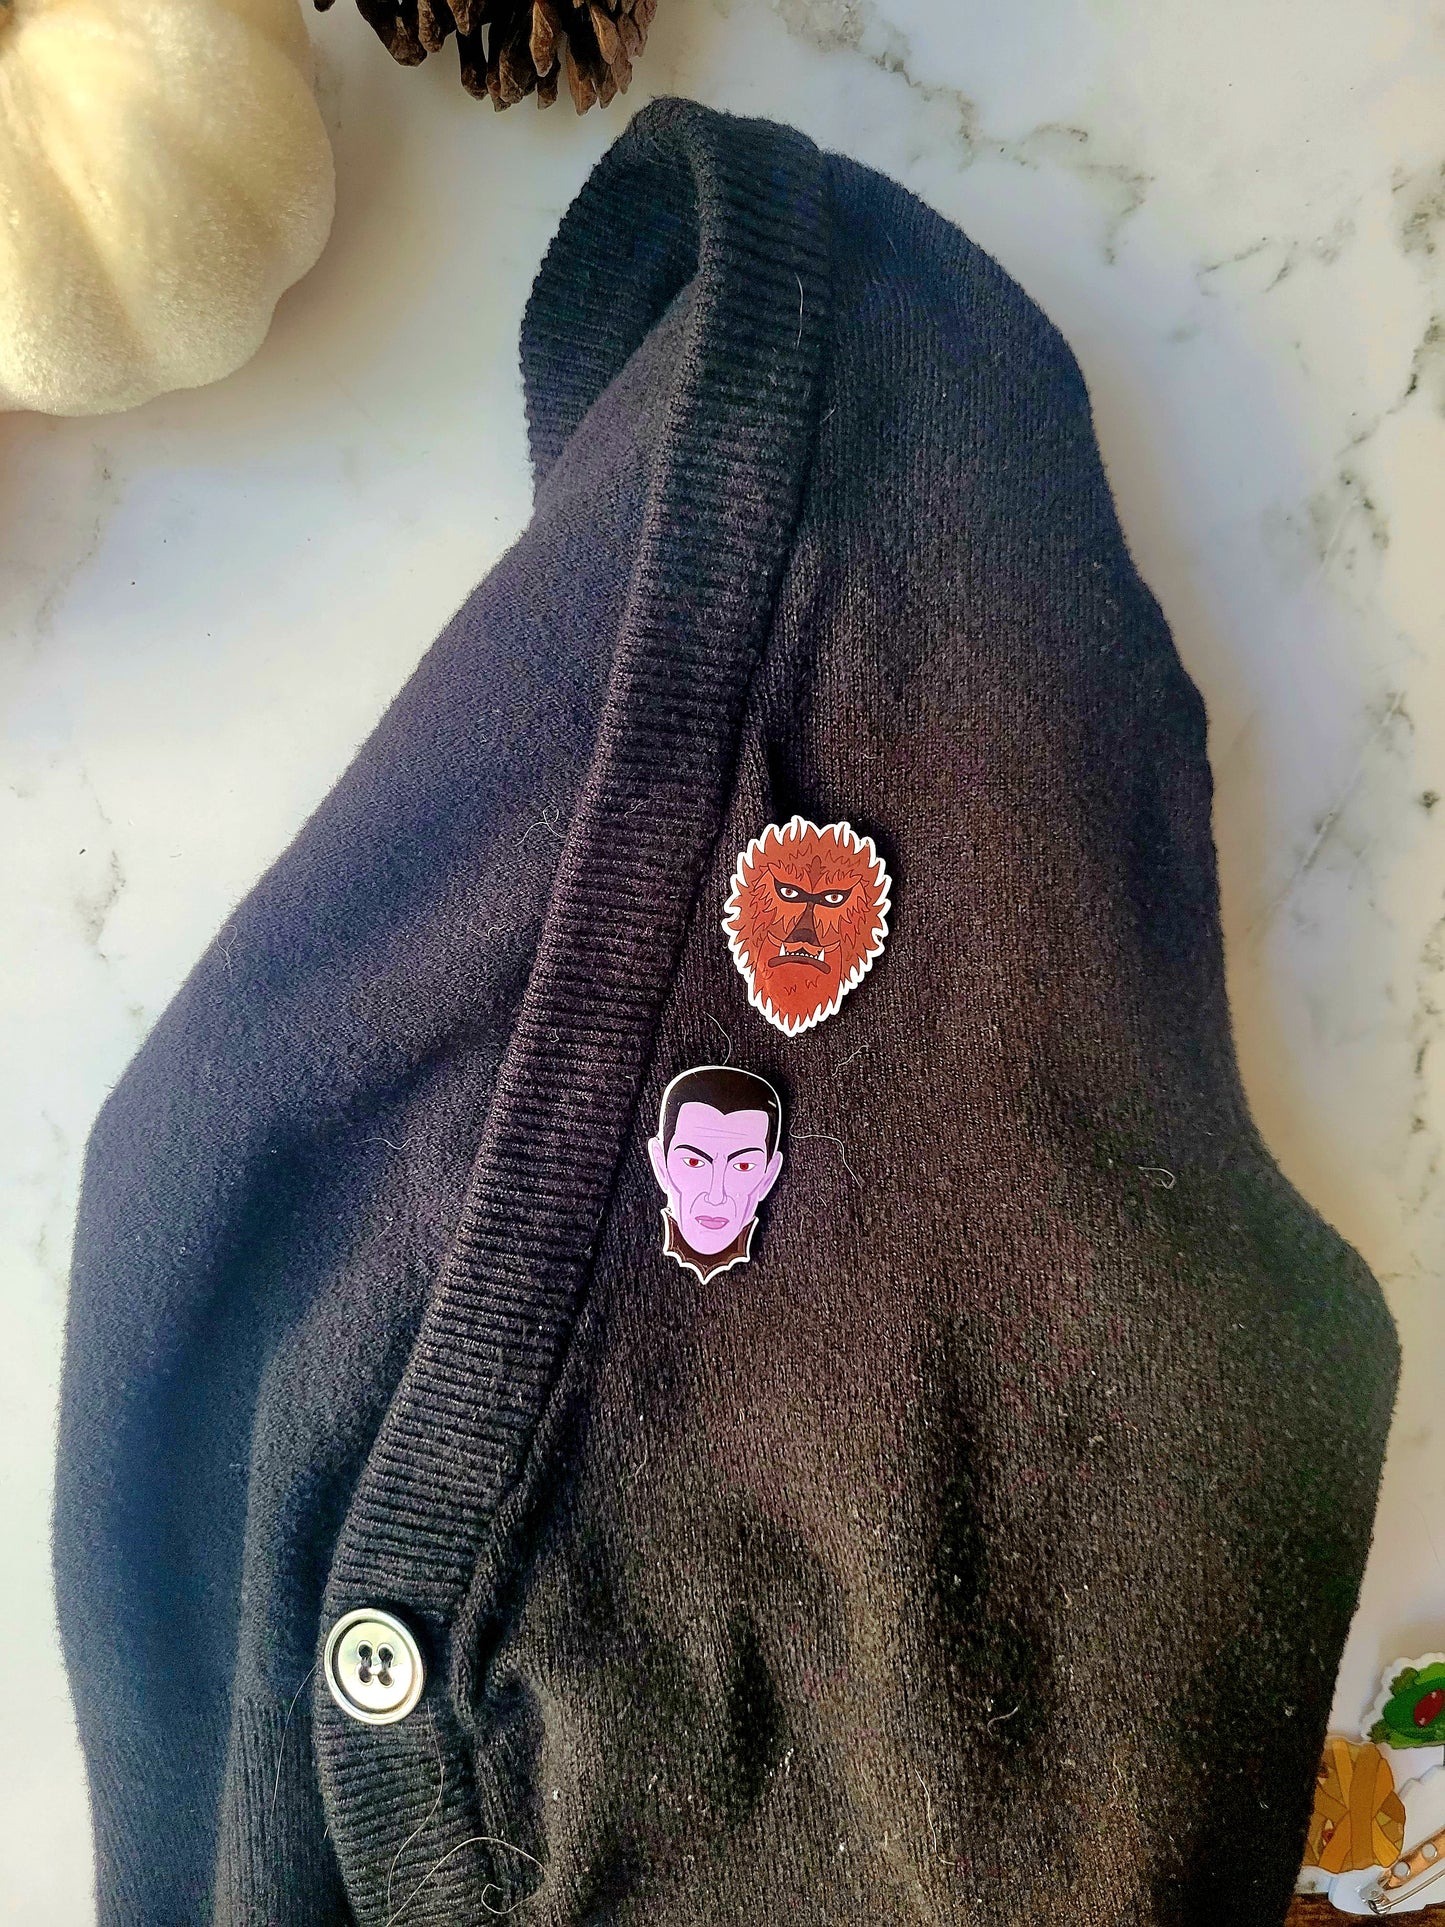 Wolfman and dracula monster pins on a black cardigan 